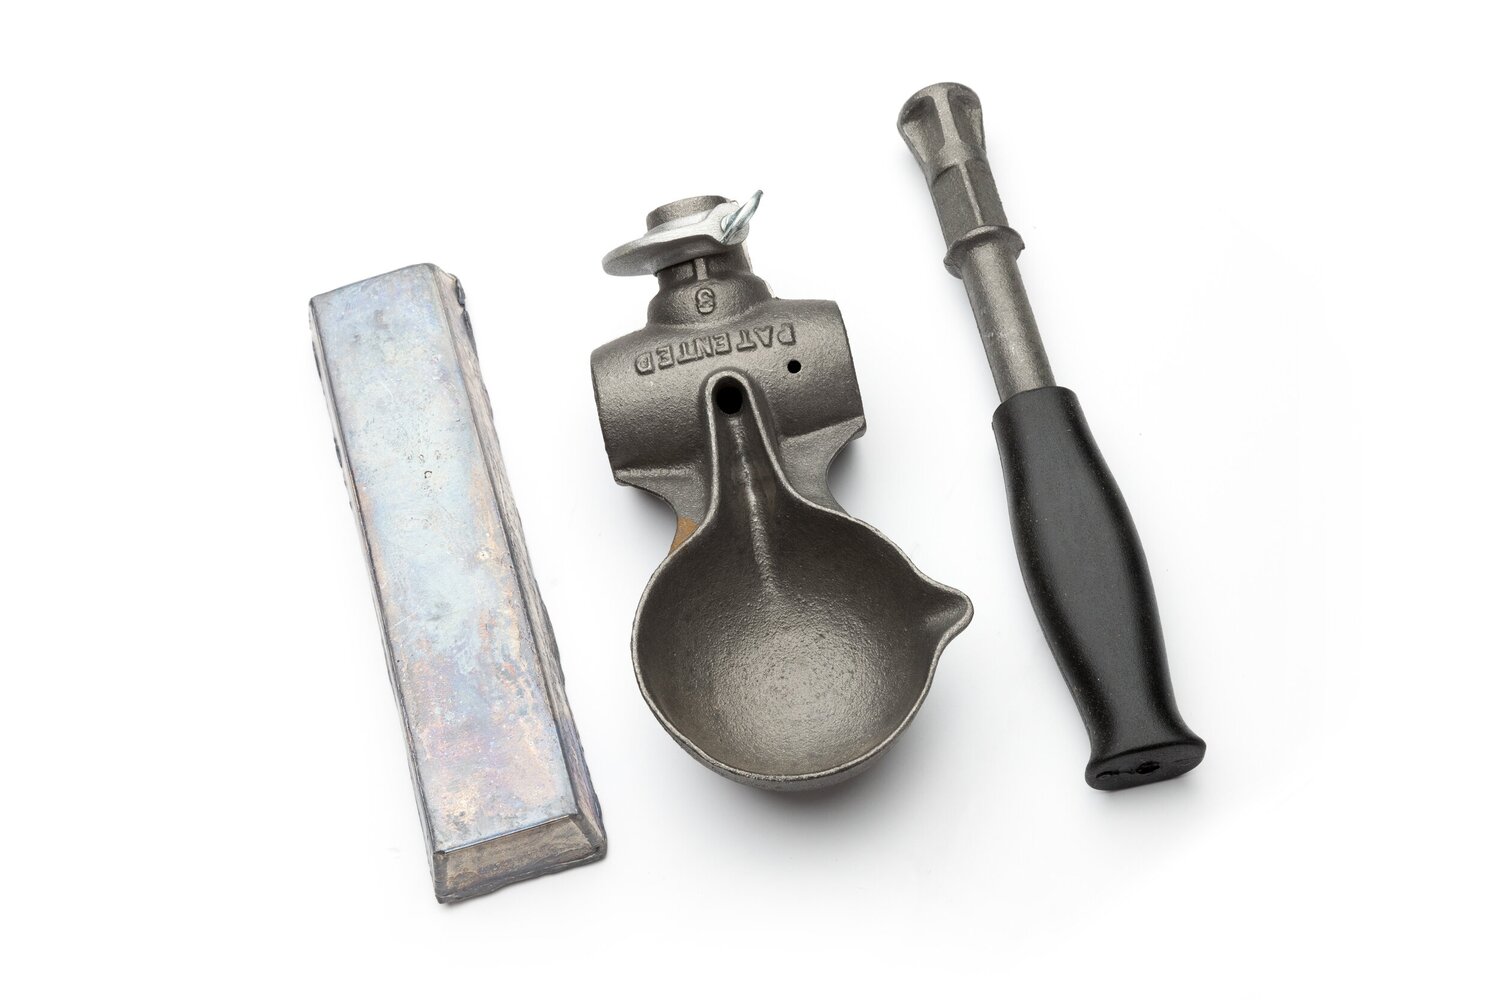 Lead Hammer Mold Set 5 Pound Perfect For General Non-Marring Hammer Work USA